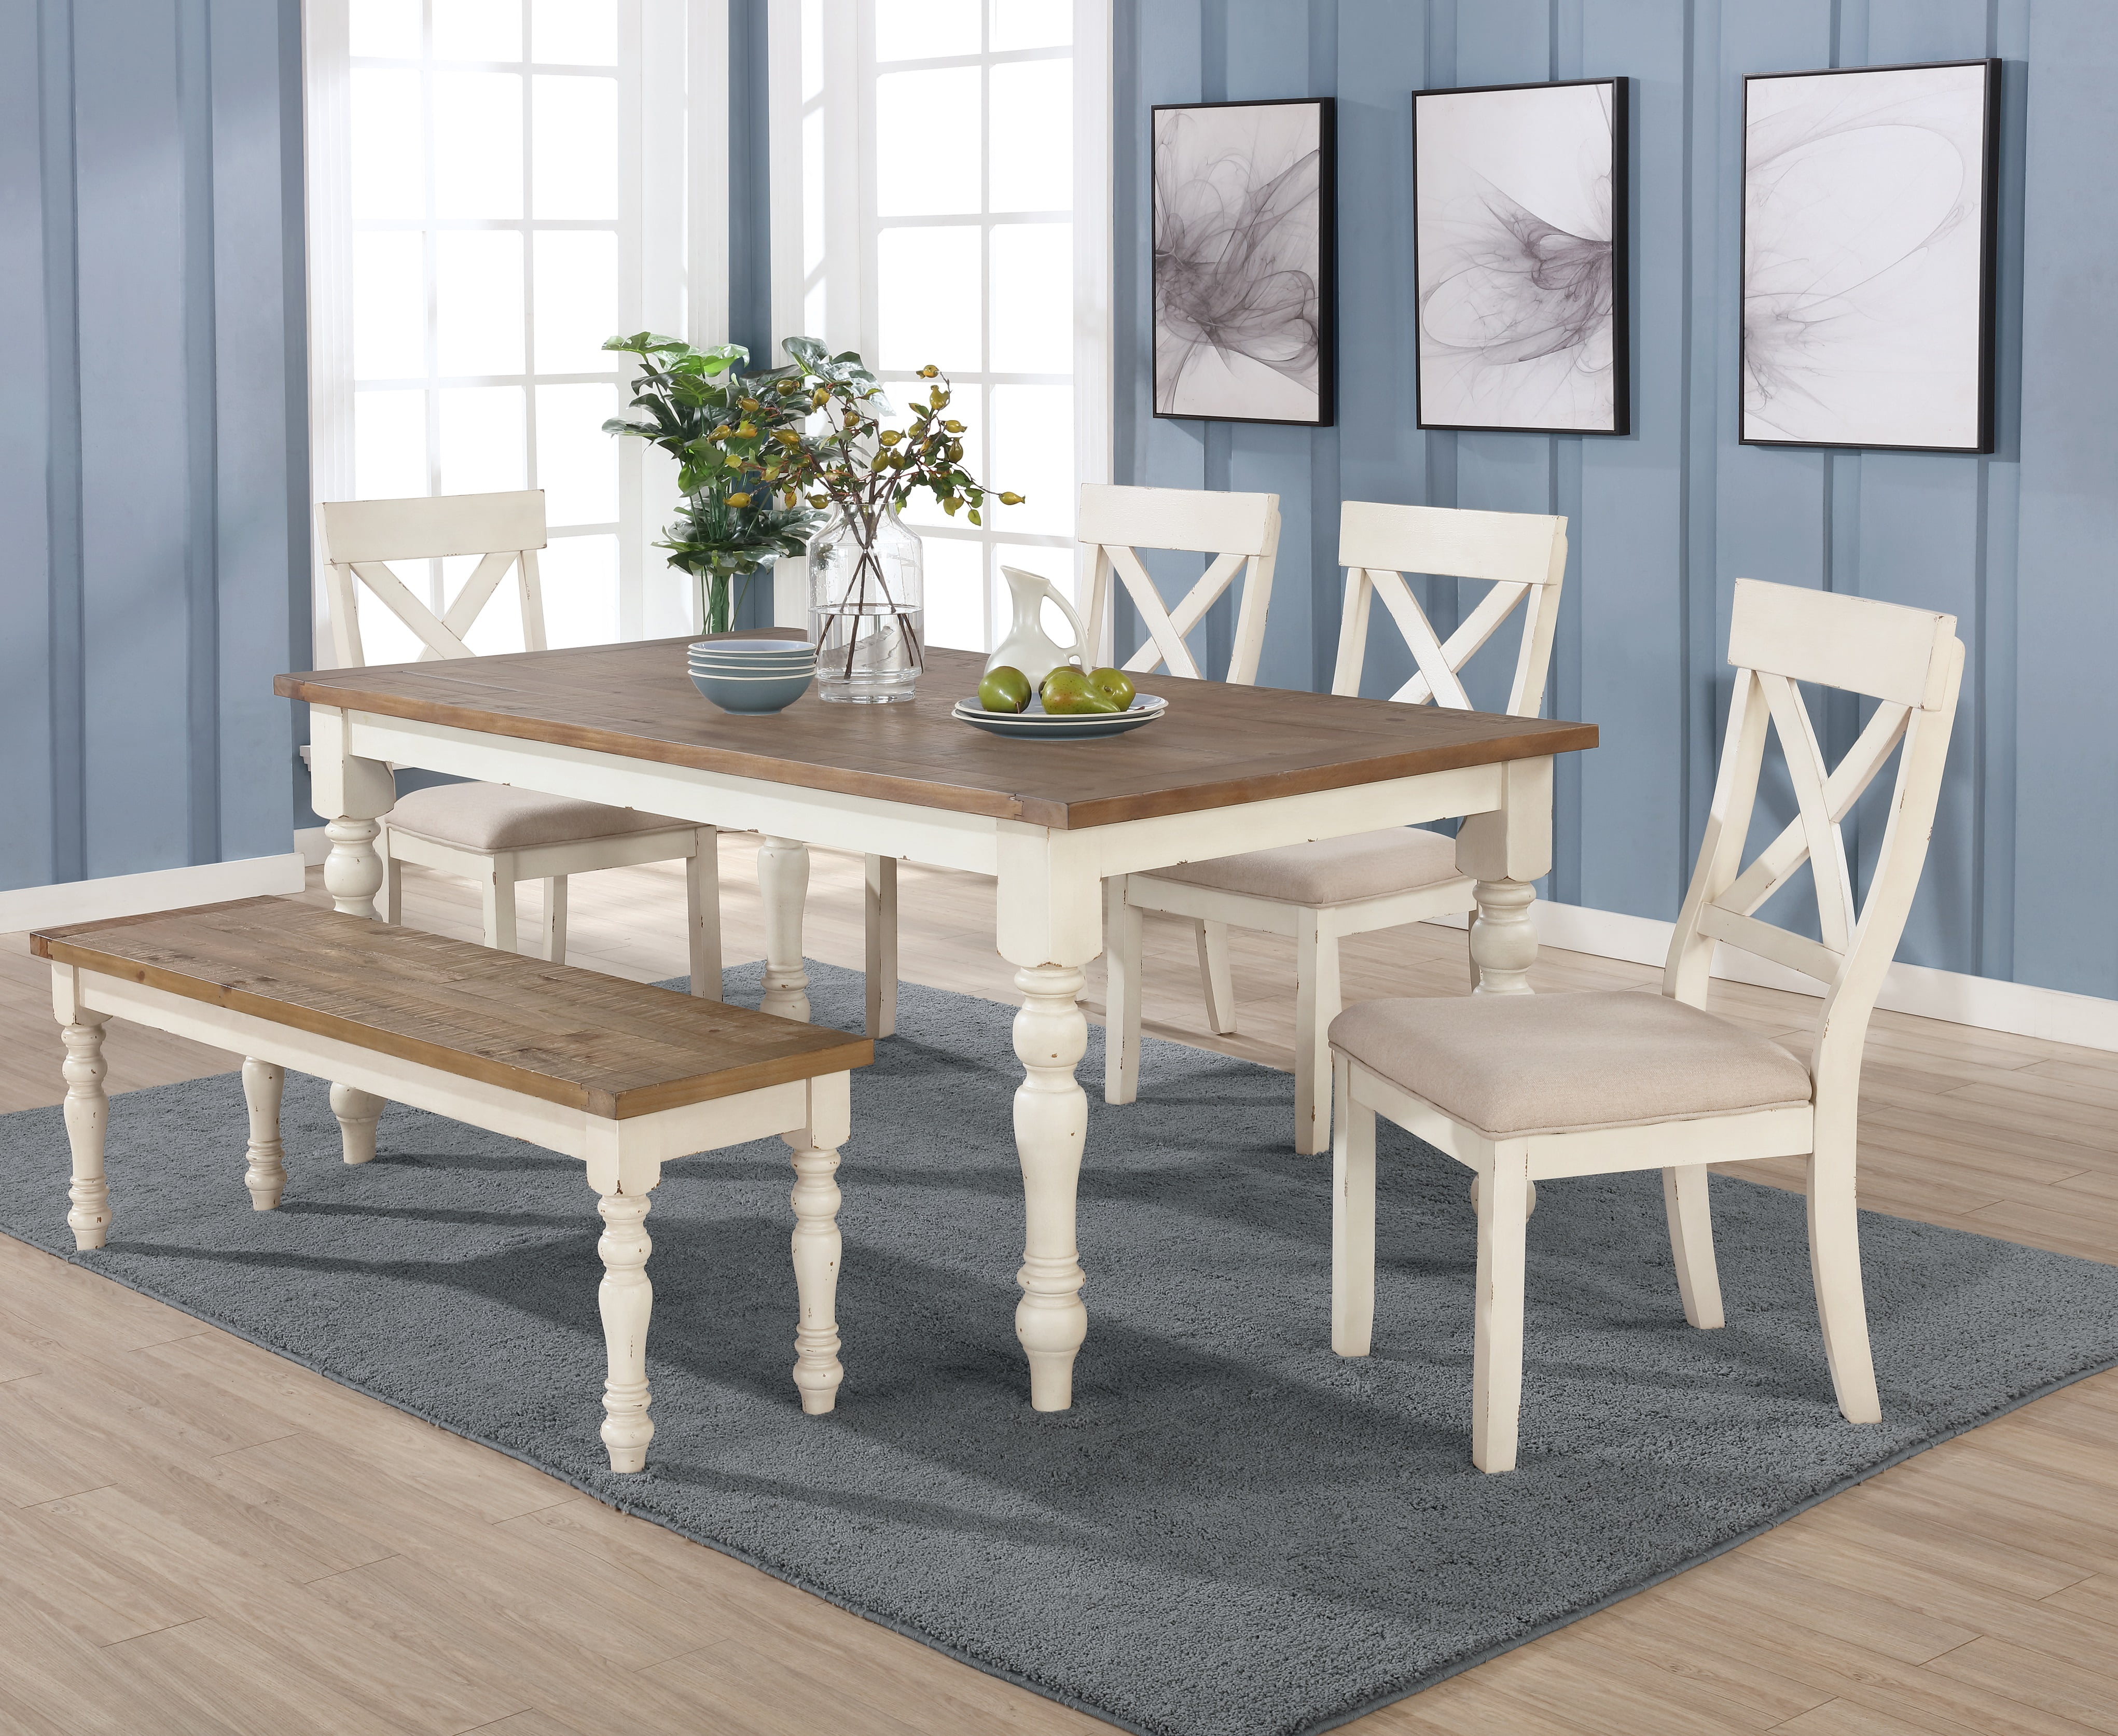 Roundhill Furniture Prato 6-piece Dining Table Set With Cross Back